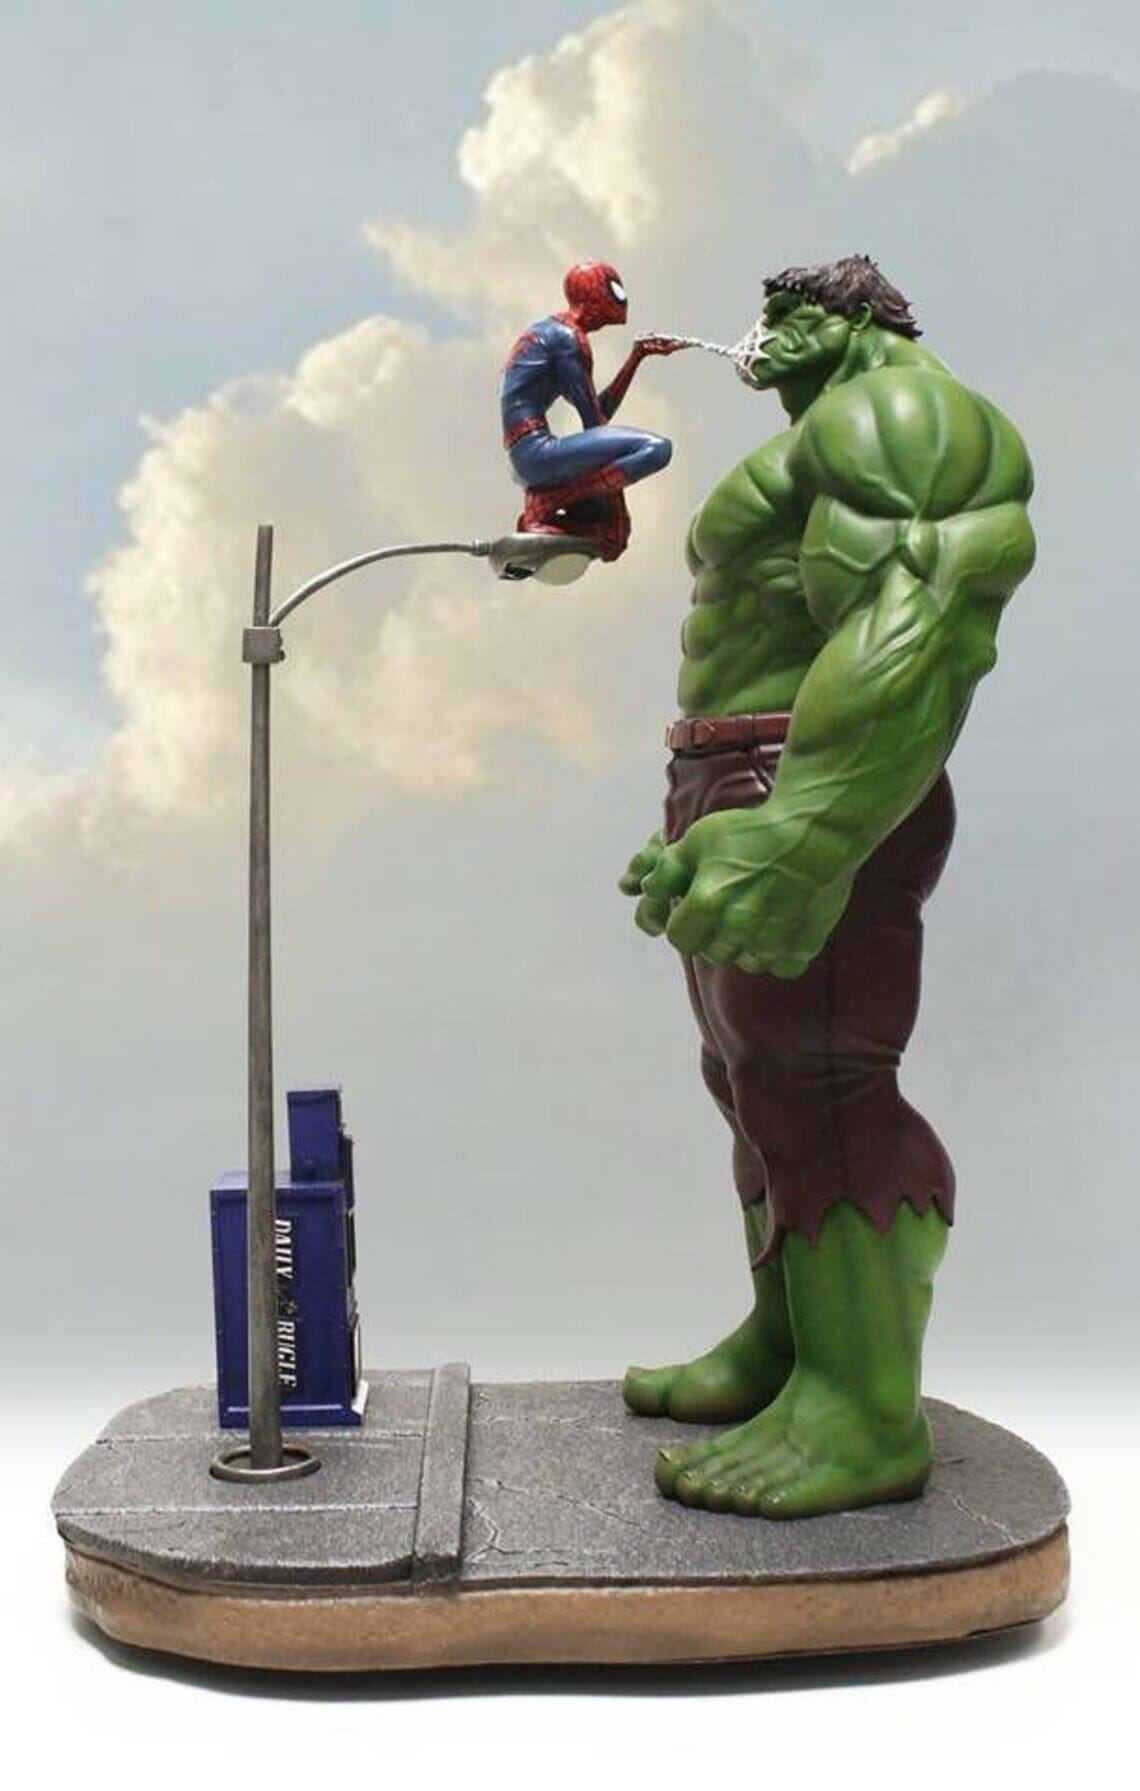 Towering Hulk unimpressed with cheeky face of webbing